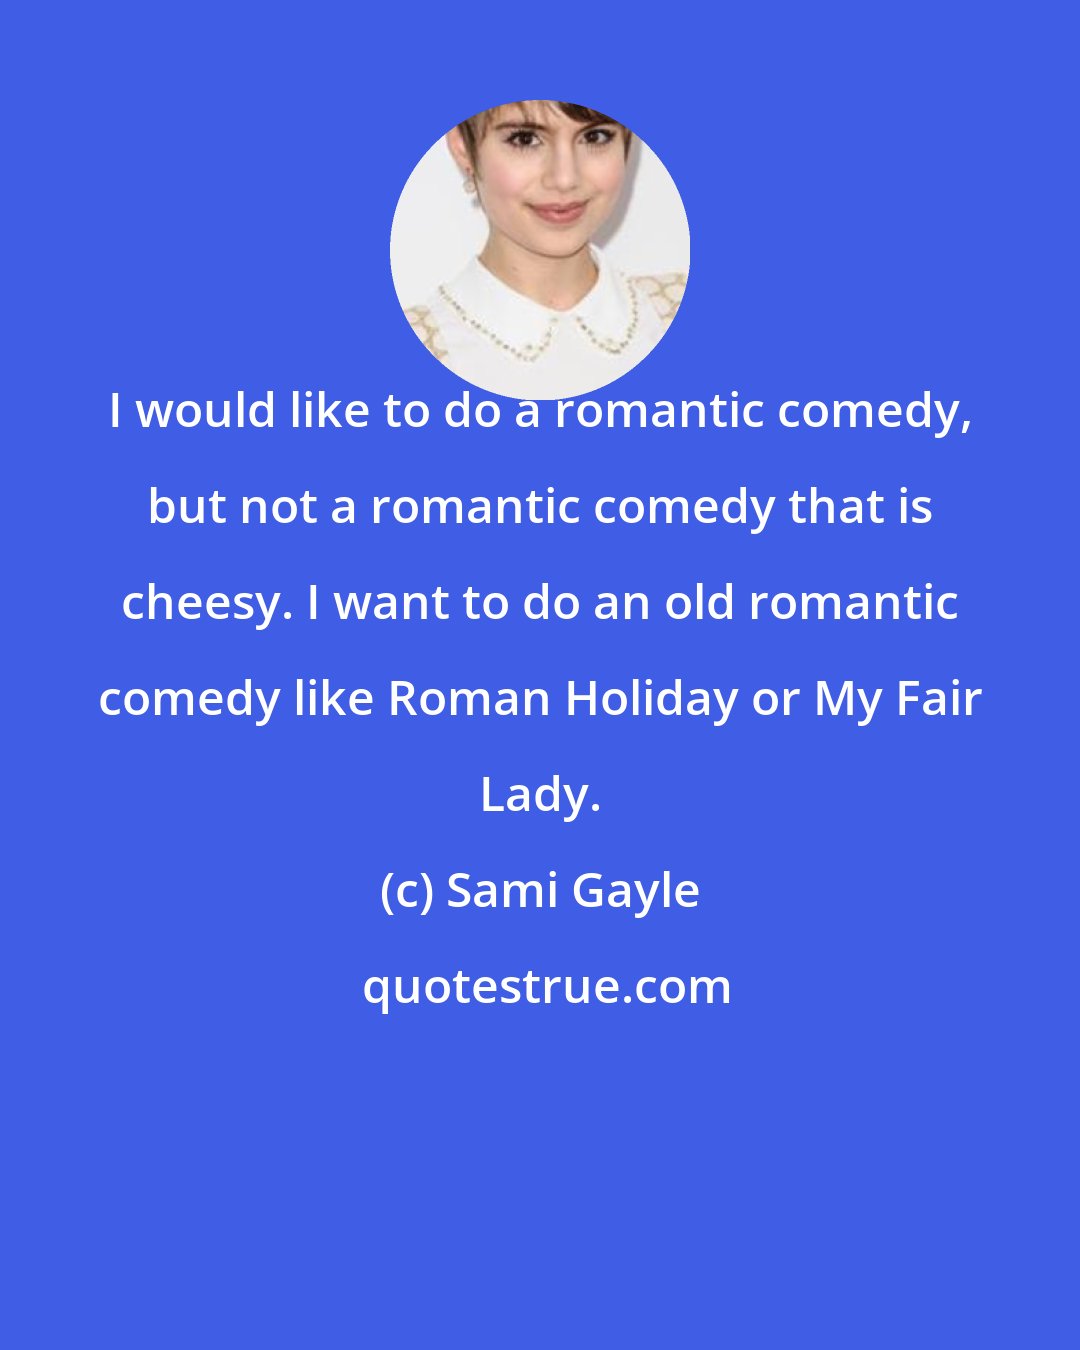 Sami Gayle: I would like to do a romantic comedy, but not a romantic comedy that is cheesy. I want to do an old romantic comedy like Roman Holiday or My Fair Lady.